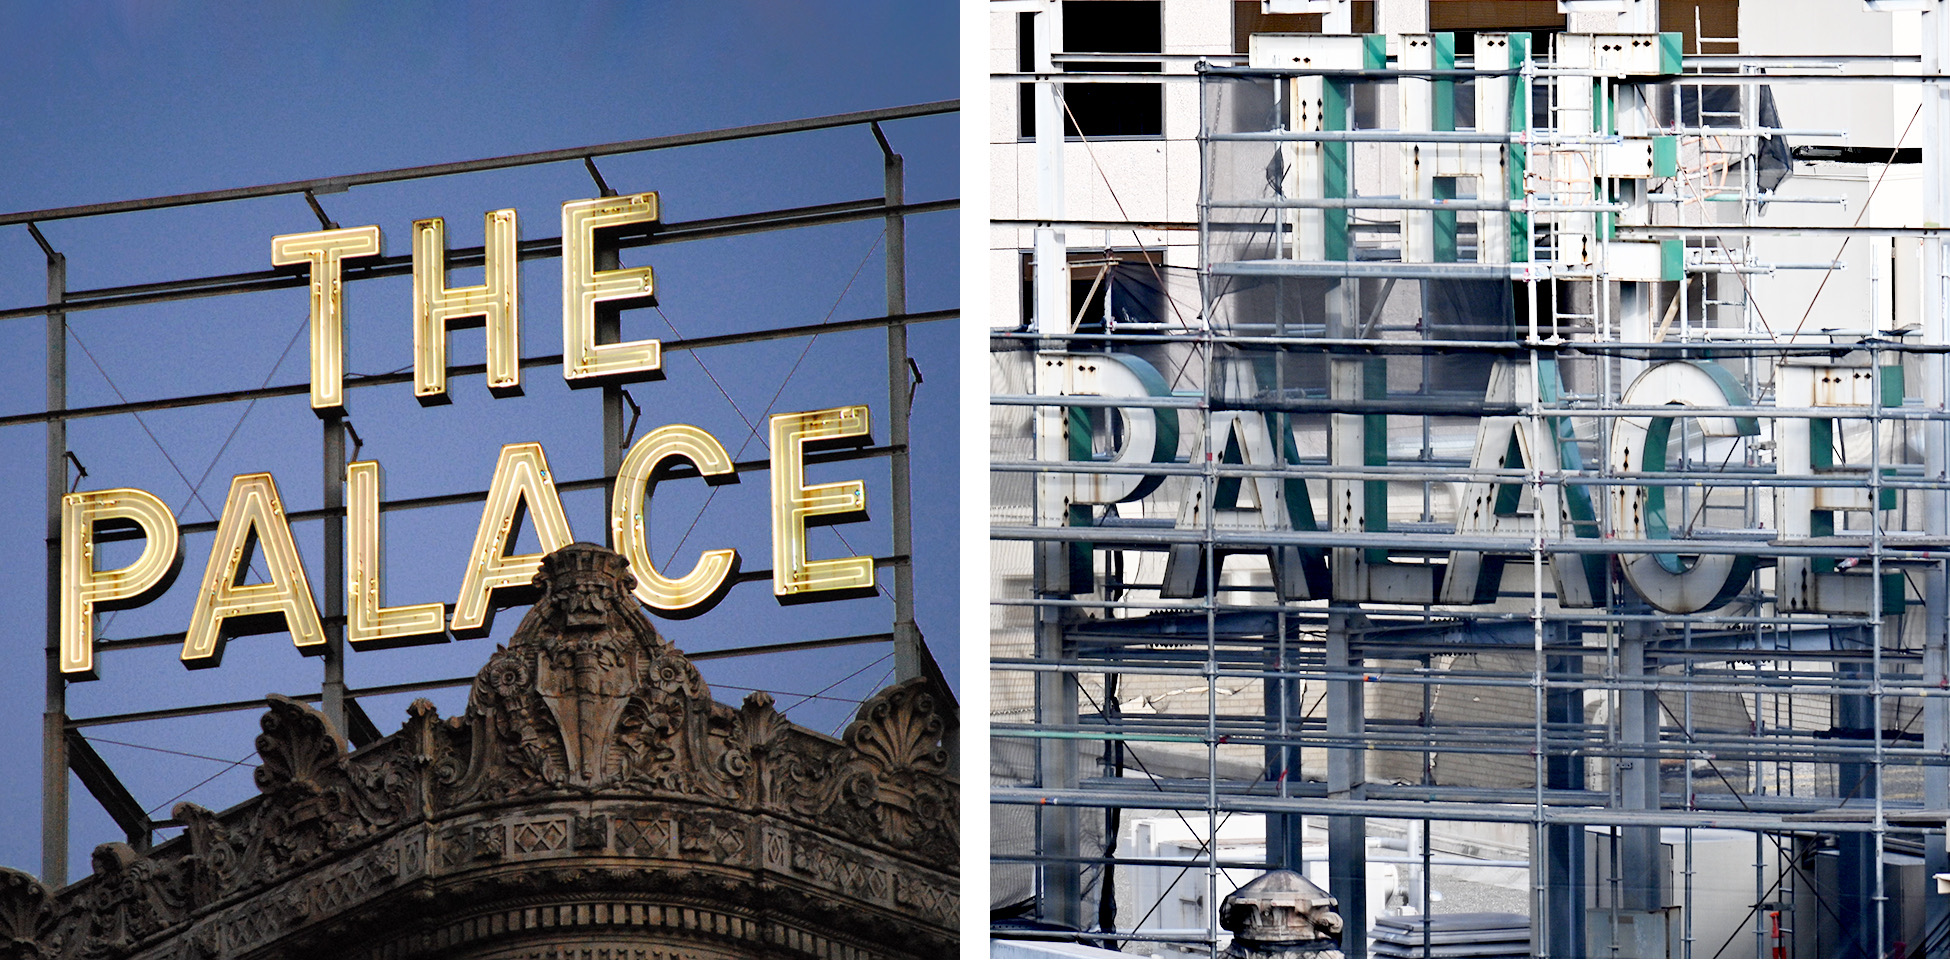 Glowing lettering against sky and scaffolding covering lettering